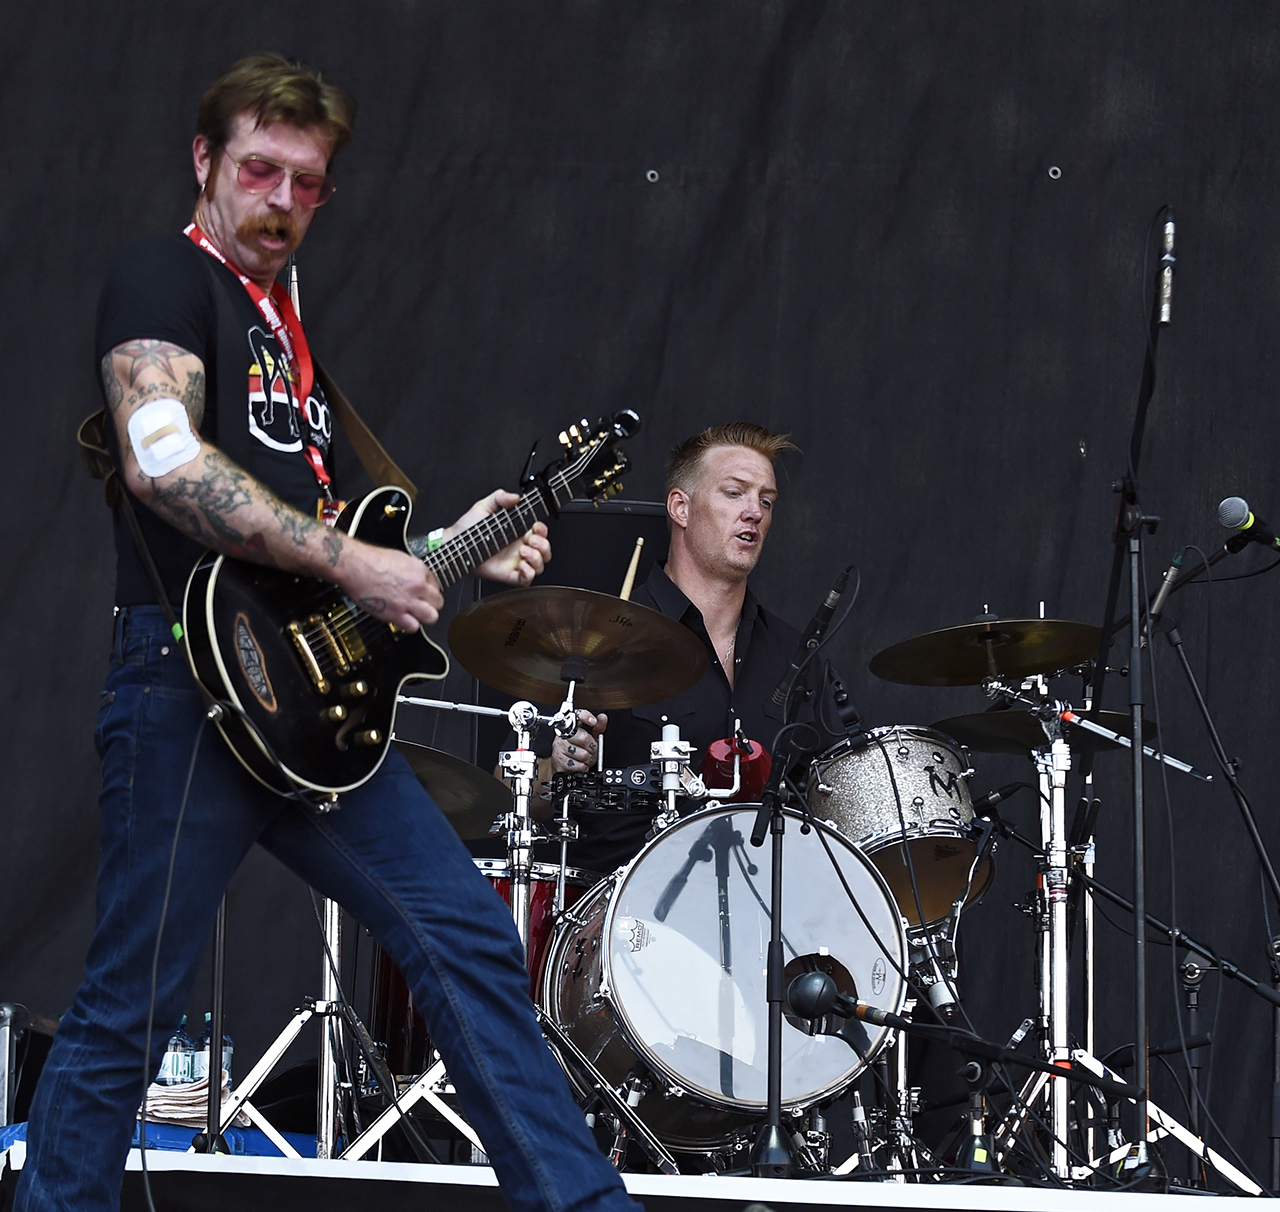 AFTER PARIS ATTACKS. In this file photo, US musicians Jesse 'The Devil' Hughes (L) and Josh Homme (R) of the band Eagles Of Death Metal perform at the Nova Rock 2015 festival in Nickelsdorf, Austria, June 12, 2015. File photo by Herbert P. Oczeret/EPA  